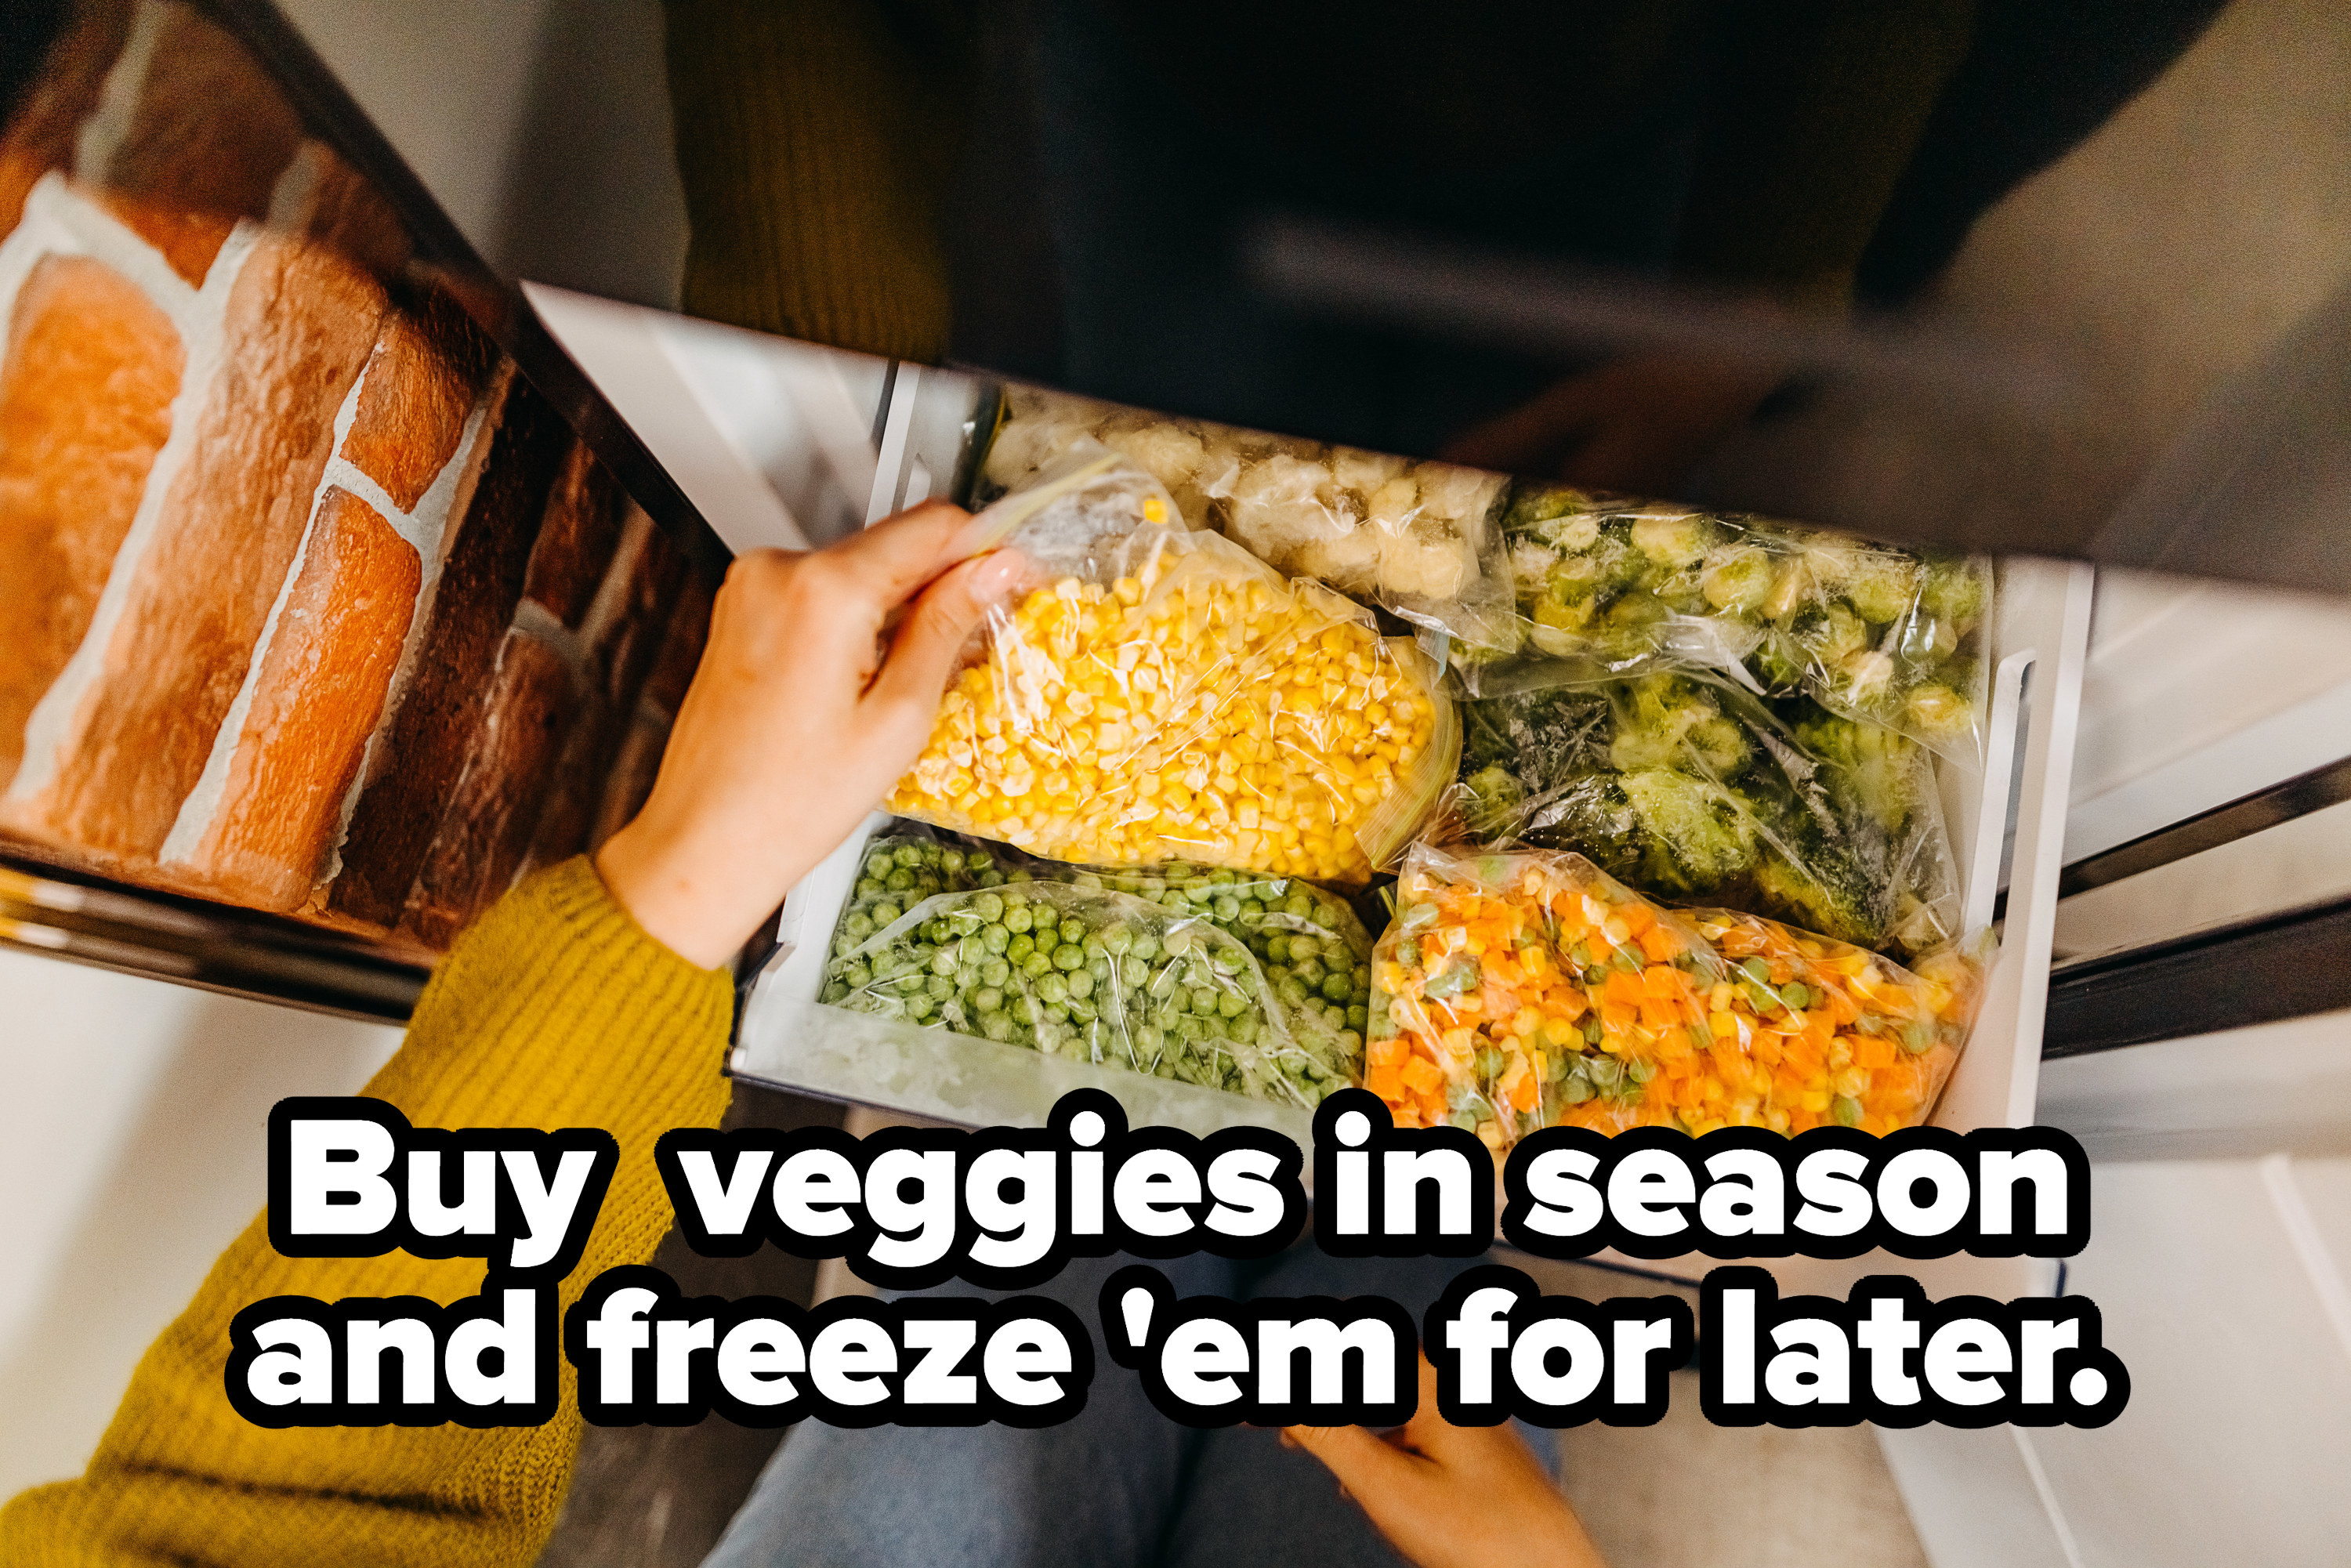 Woman putting container with frozen mixed vegetables in the refrigerator